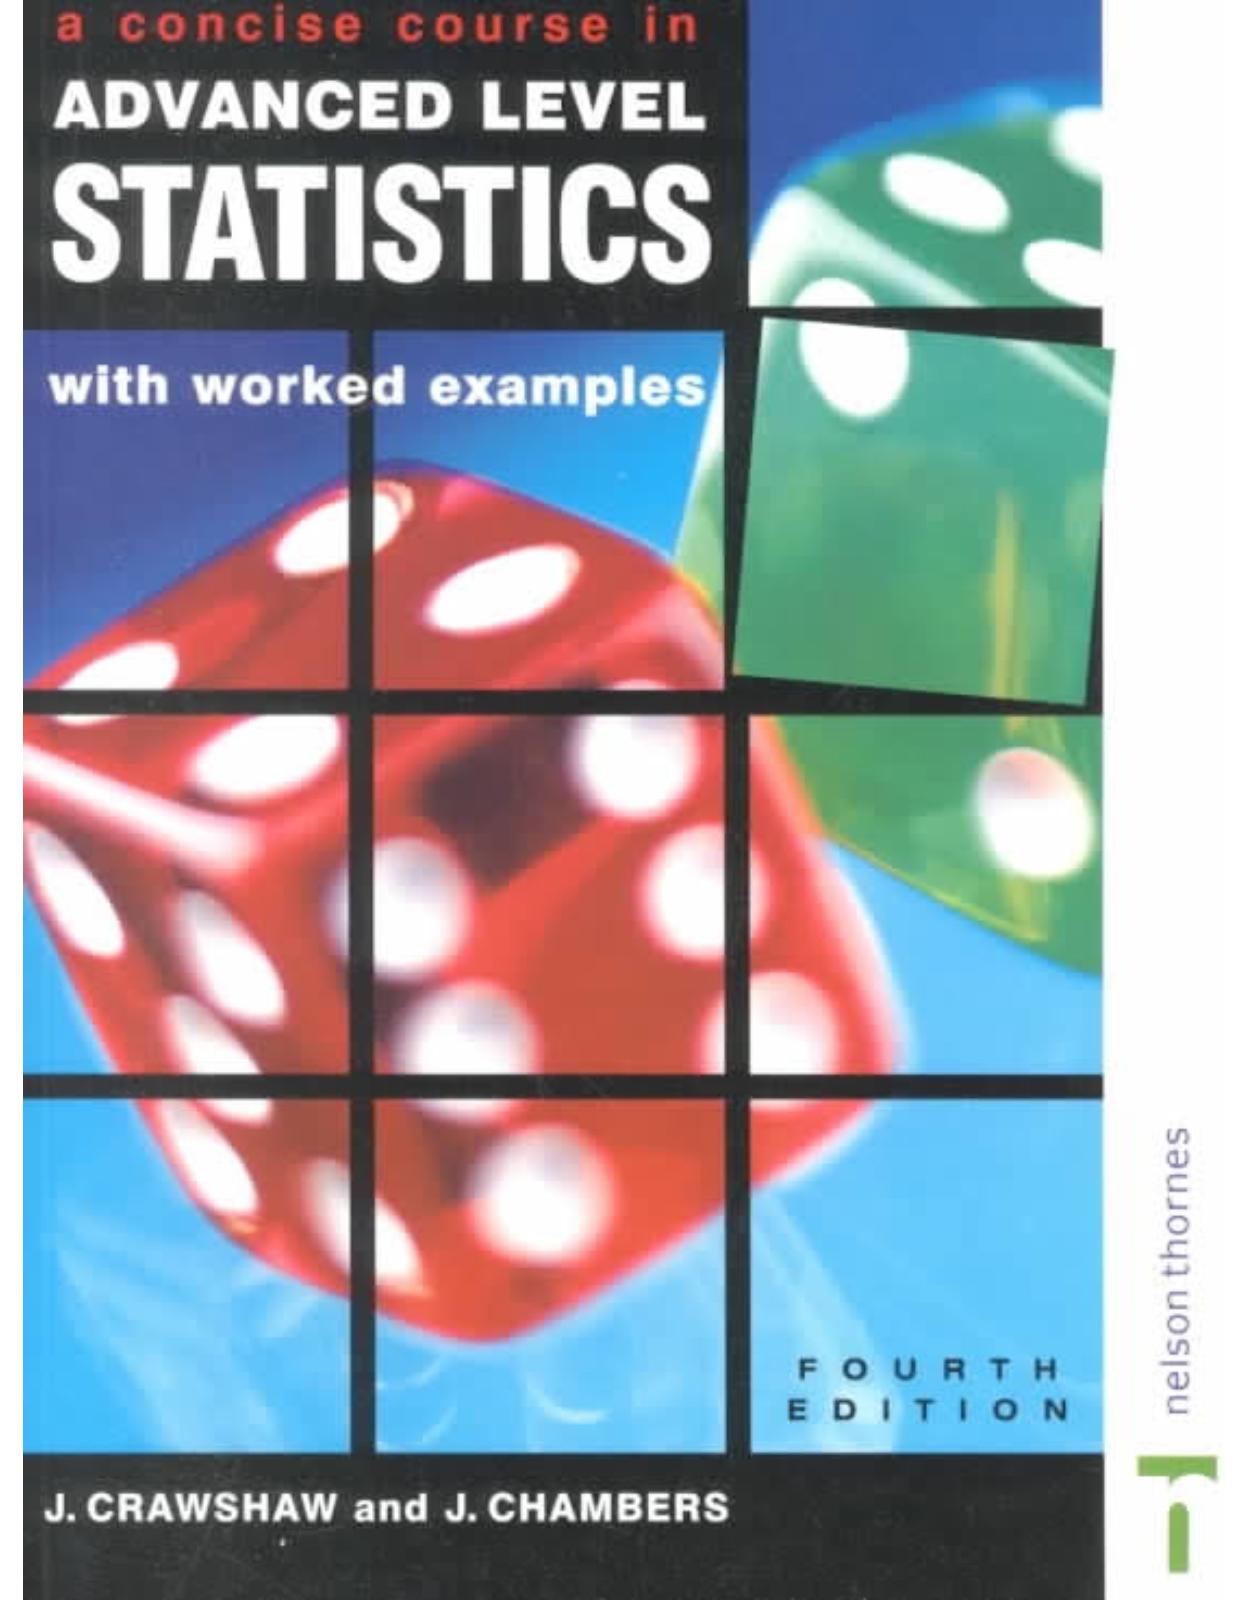 A Concise Course in Advanced Level Statistics 